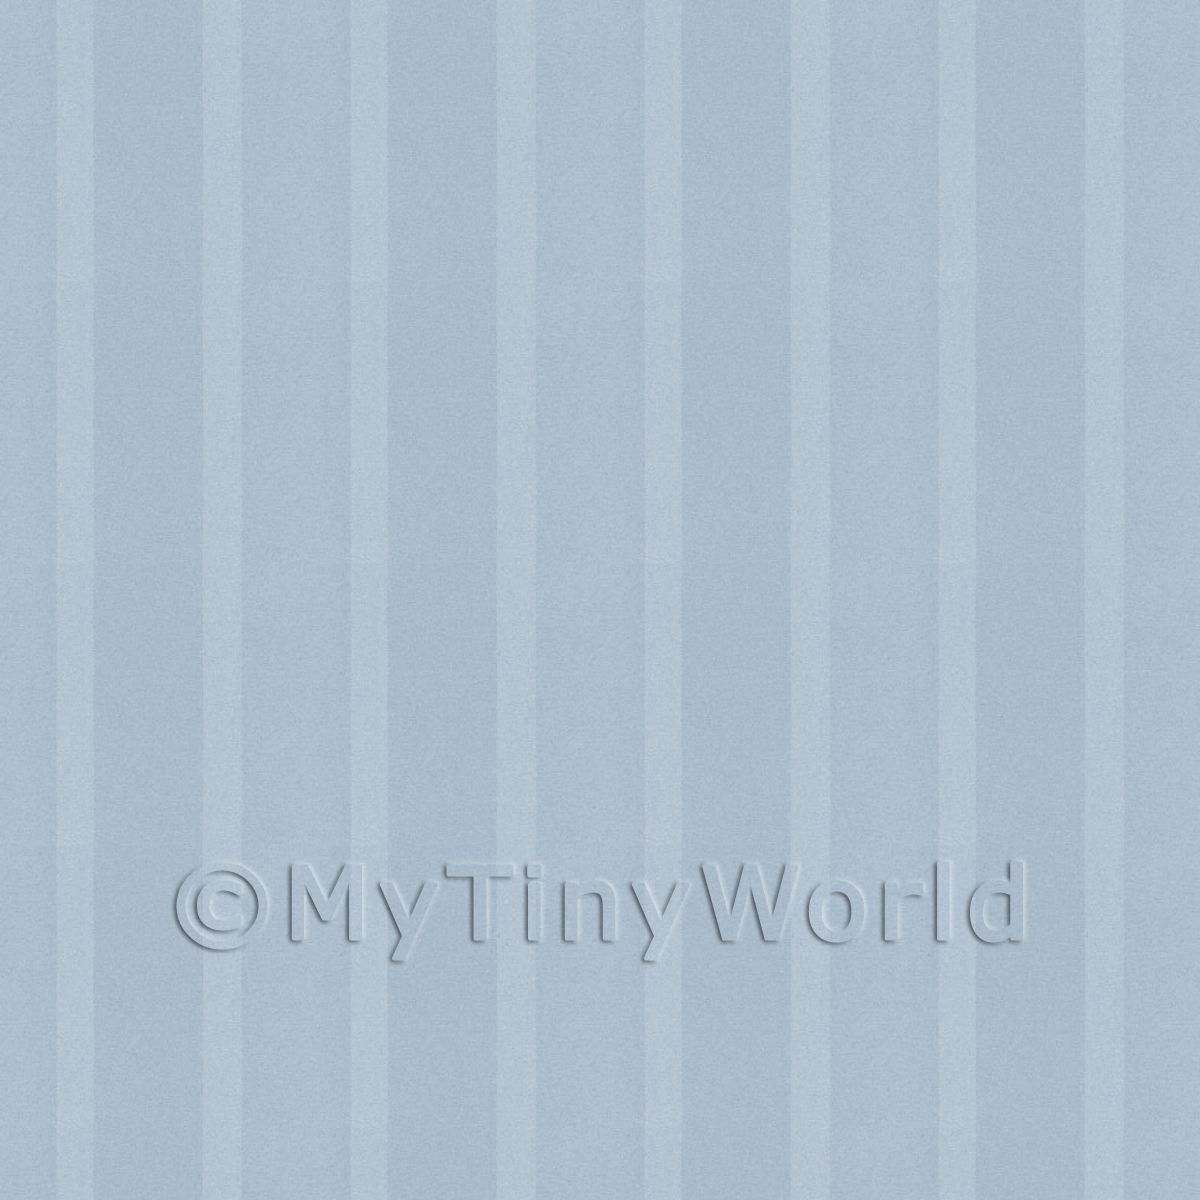 Dolls House Wallpaper - Dolls House Miniature Thick Blue Striped Wallpaper  | Product Code 12398 | Price From 